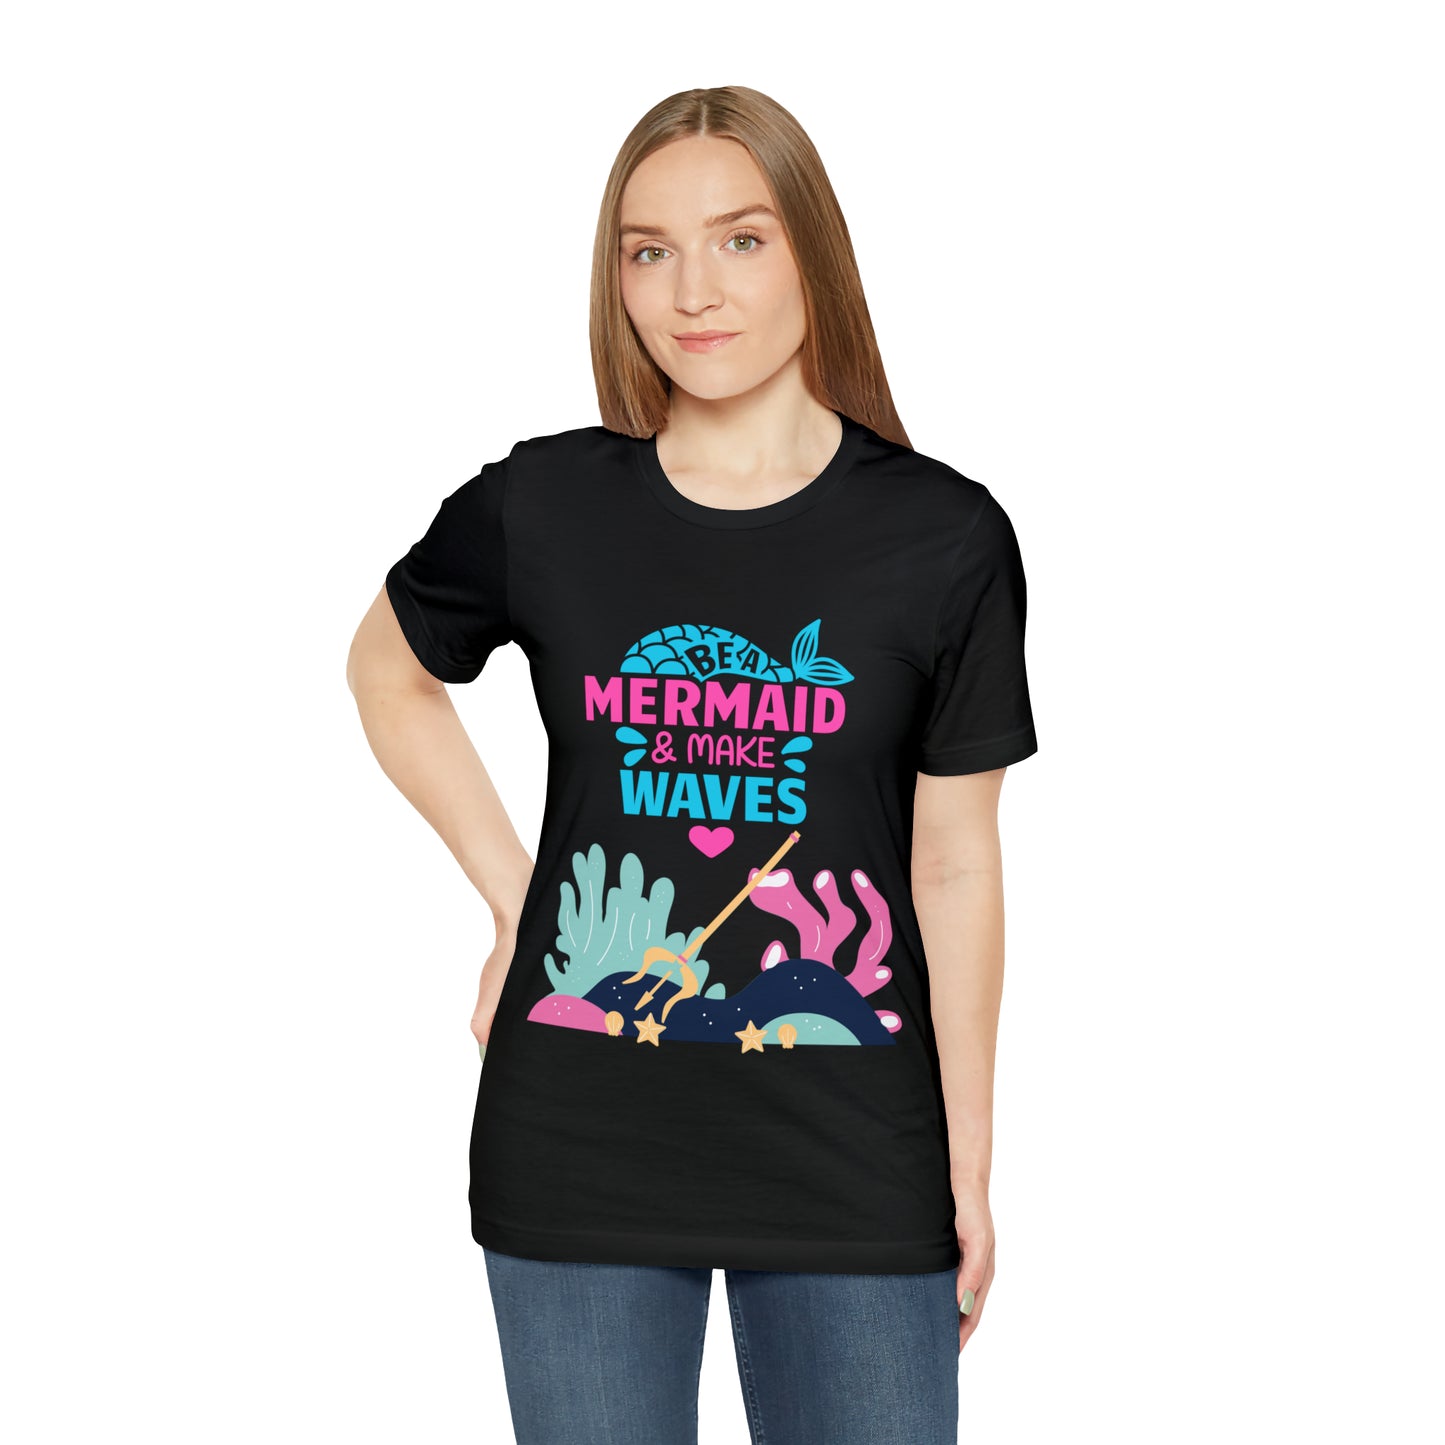 Mermaid T-Shirt - Unisex jersey tee with an enchanting design, soft cotton fabric, and ribbed knit collars, perfect for mermaid enthusiasts and lovers of mermaid-inspired clothing.Coral inspired